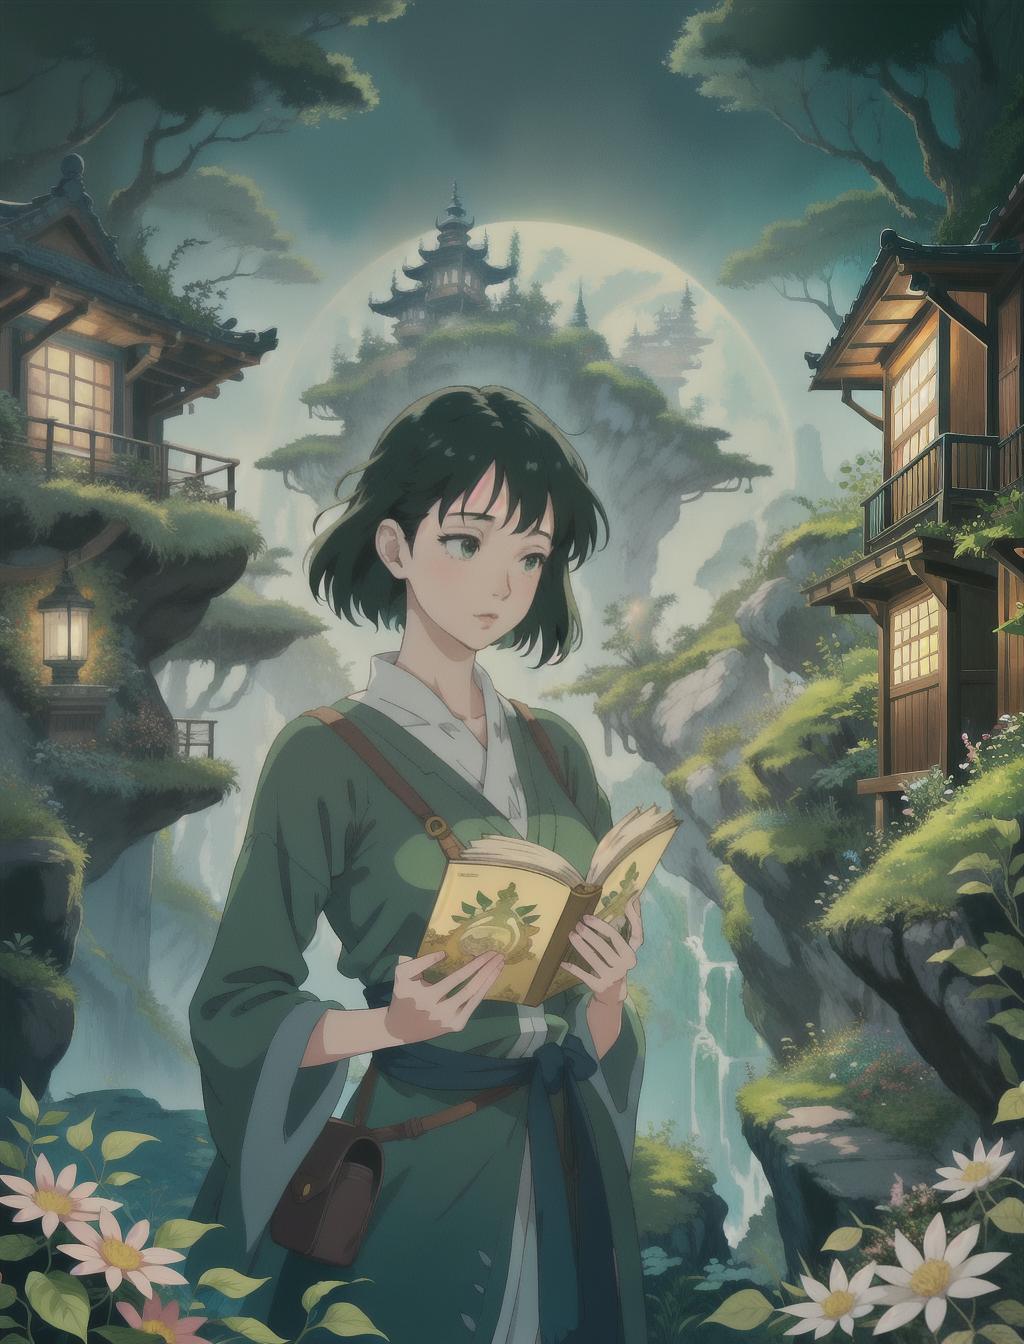  a very hot and beautiful woman reading book, in an open space, in a garden, Create art in Studio Ghibli style, Emulate Studio Ghibli aesthetics, Ghibli-inspired illustration, Capture the Ghibli magic, Mimic Hayao Miyazaki's artistic vision, Dreamy and whimsical Ghibli visuals, Nature and fantasy blend like Ghibli, Ghibli-inspired landscape art, Ghibli color palette and charm, Artwork reminiscent of Studio Ghibli hyperrealistic, full body, detailed clothing, highly detailed, cinematic lighting, stunningly beautiful, intricate, sharp focus, f/1. 8, 85mm, (centered image composition), (professionally color graded), ((bright soft diffused light)), volumetric fog, trending on instagram, trending on tumblr, HDR 4K, 8K